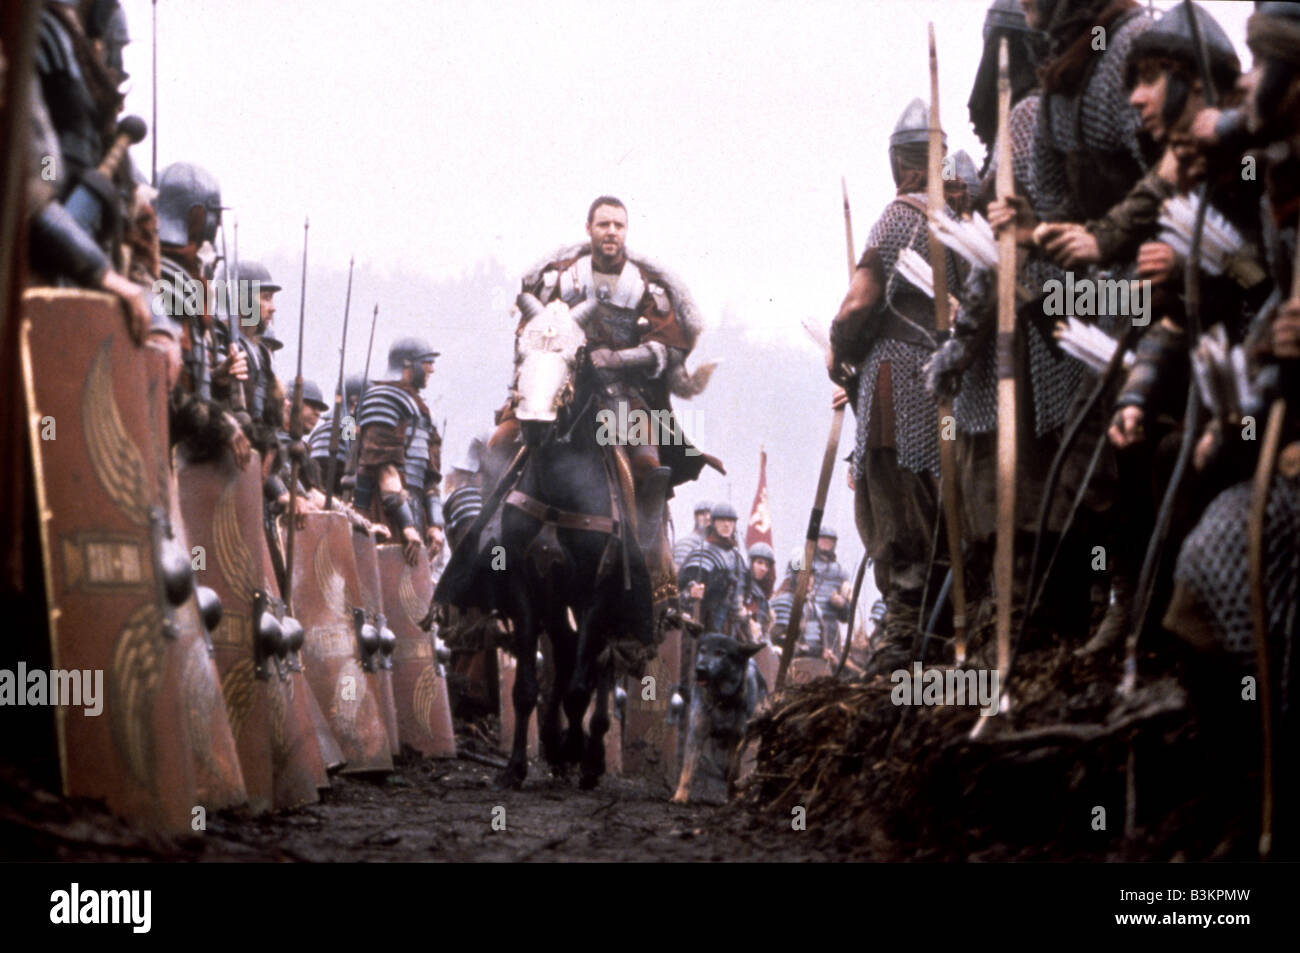 GLADIATOR 2000 Universal/DreamWorks film avec Russell Crowe Banque D'Images